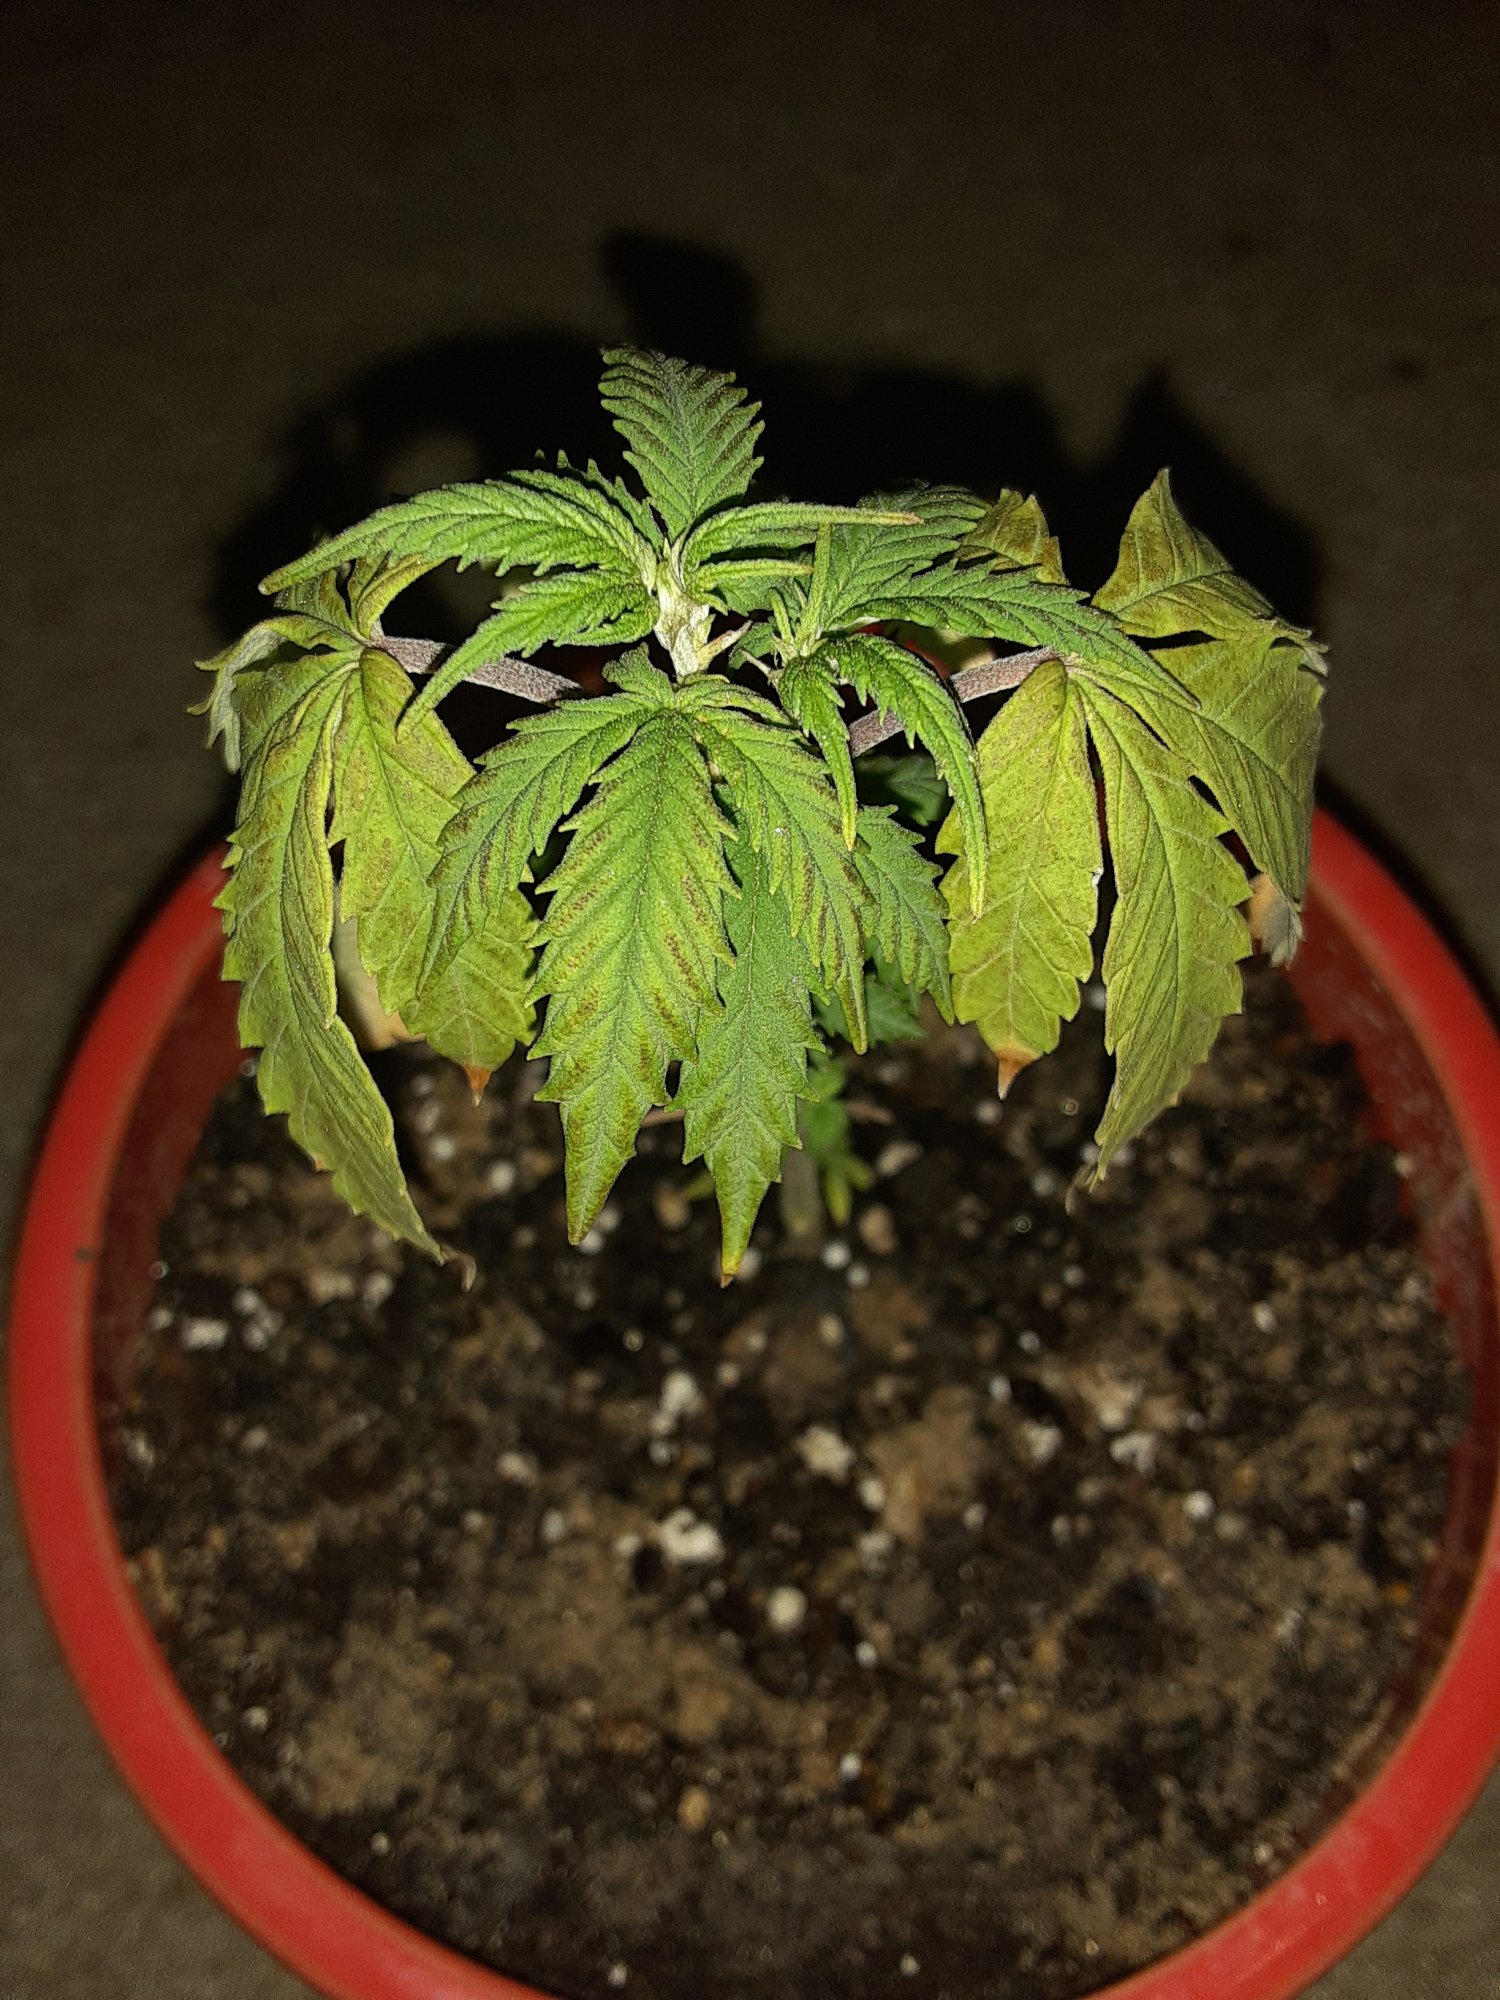 Need help figuring out how to save my little clone